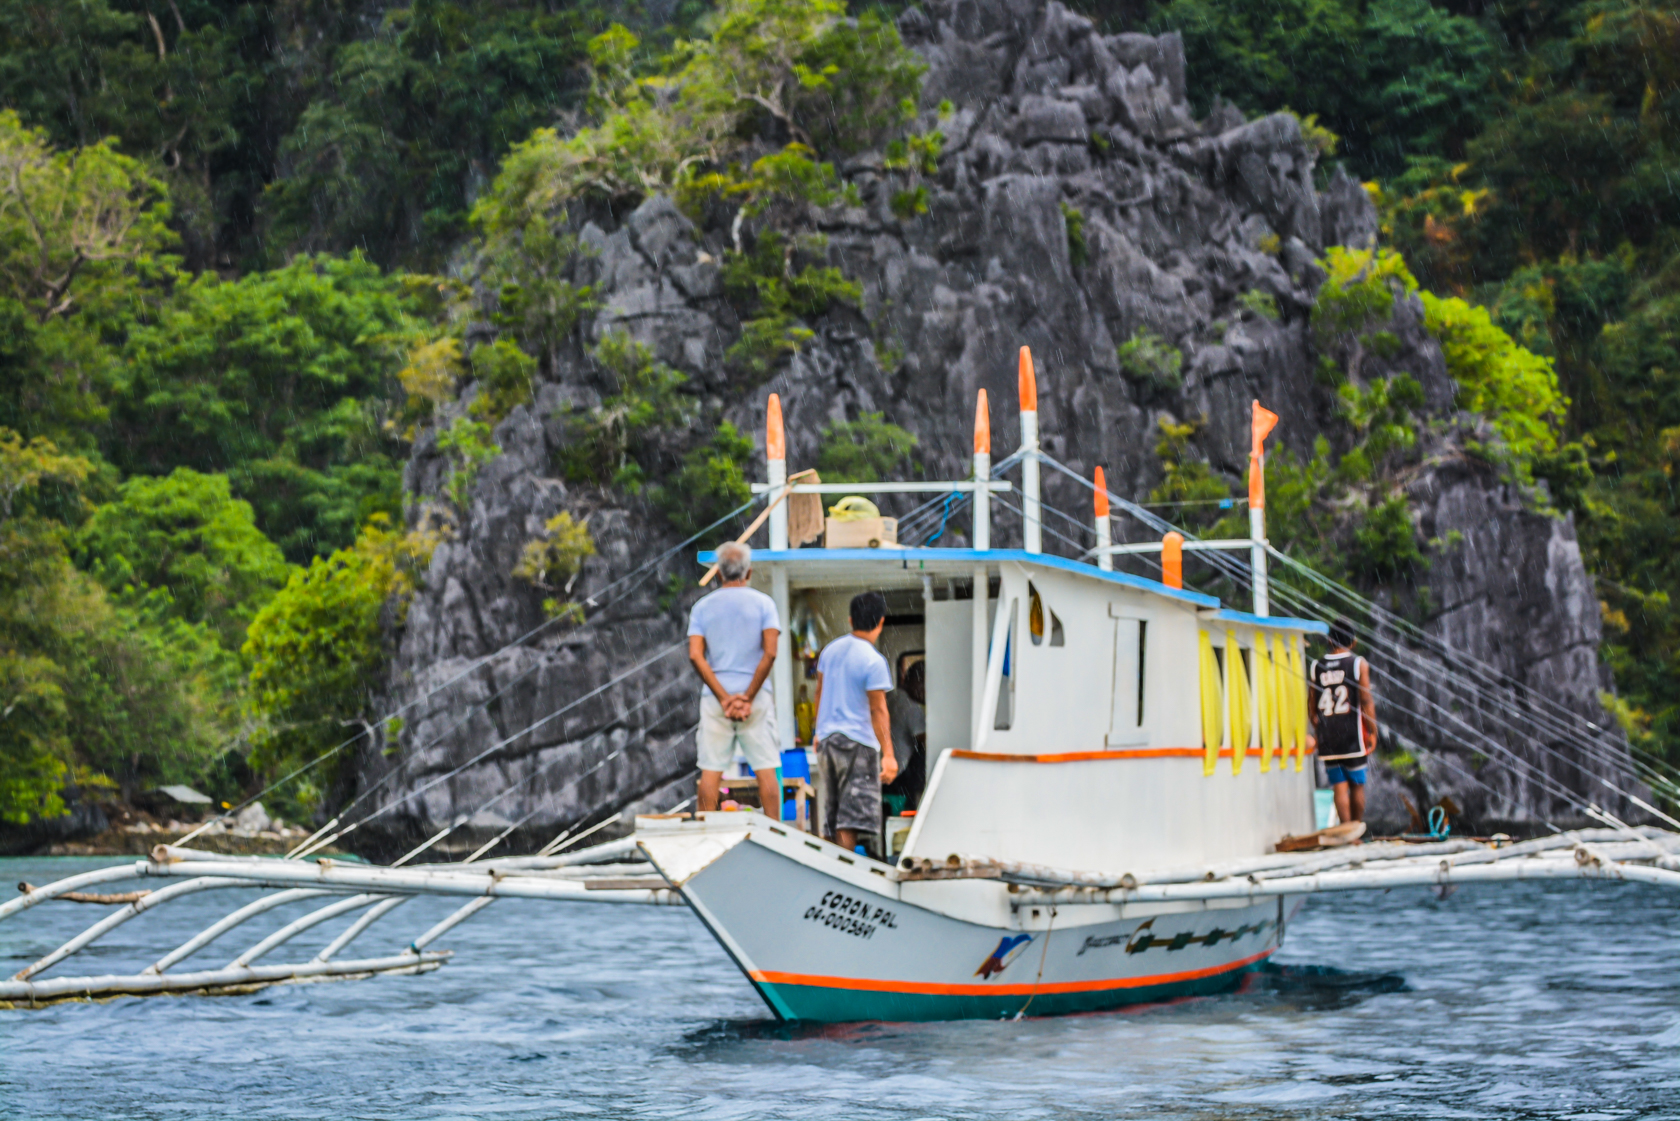 windstar cruises agency in the philippines